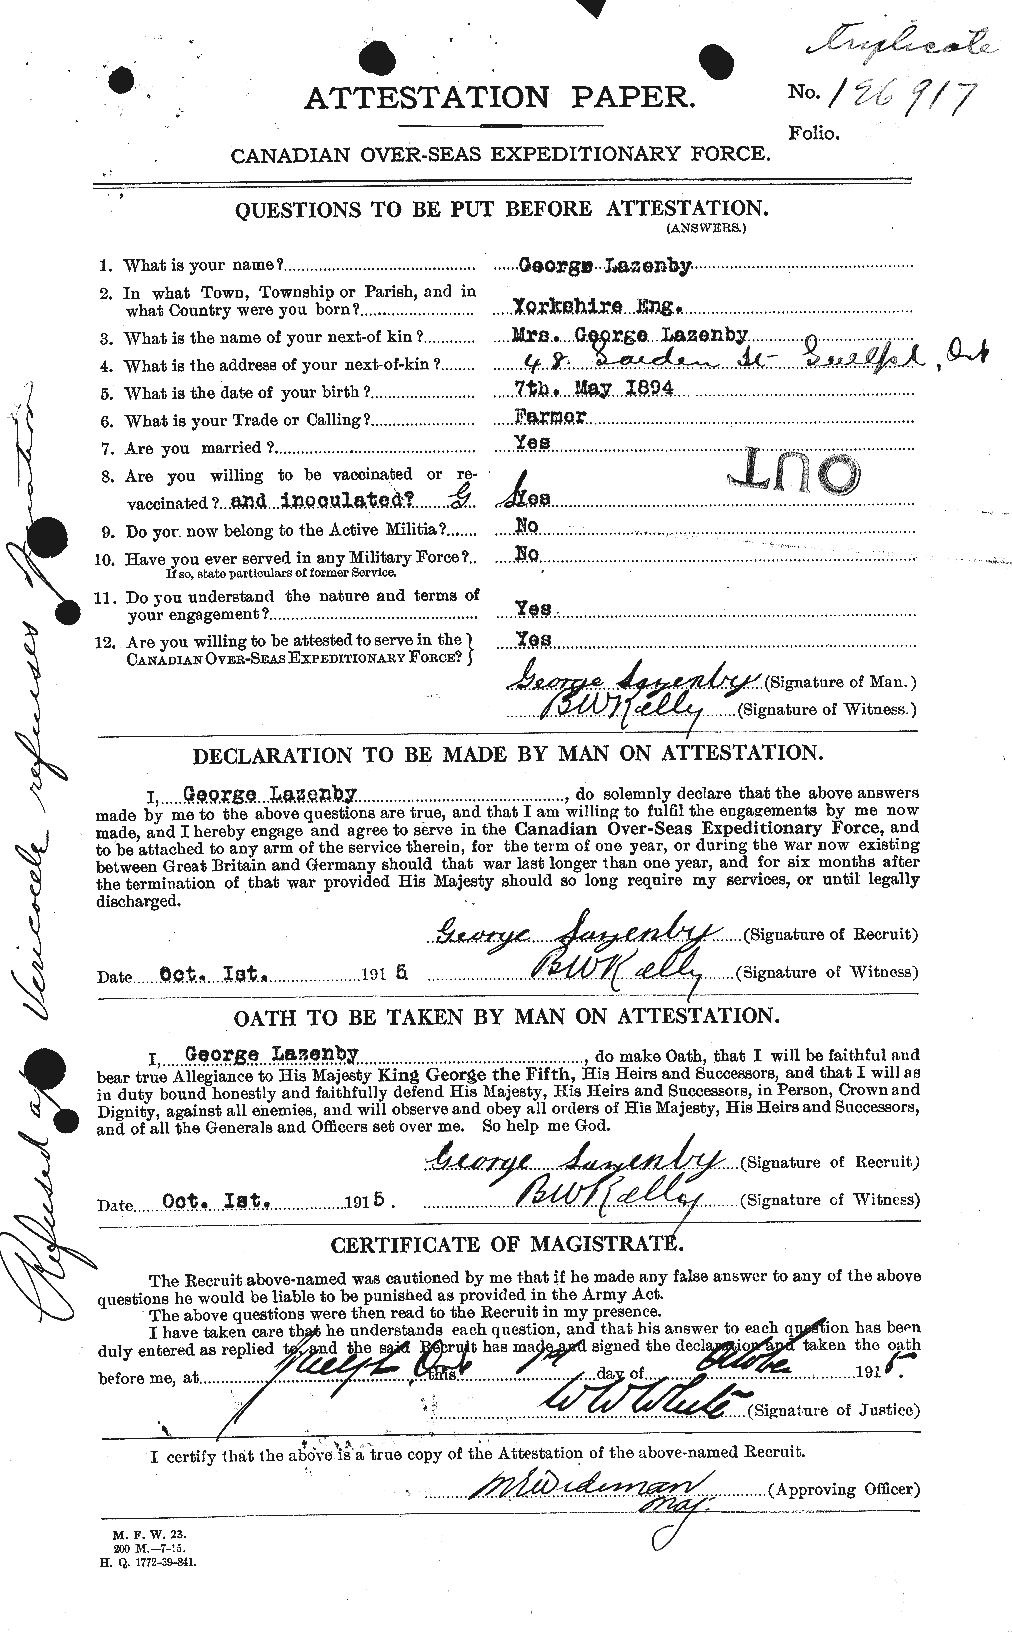 Personnel Records of the First World War - CEF 453201a